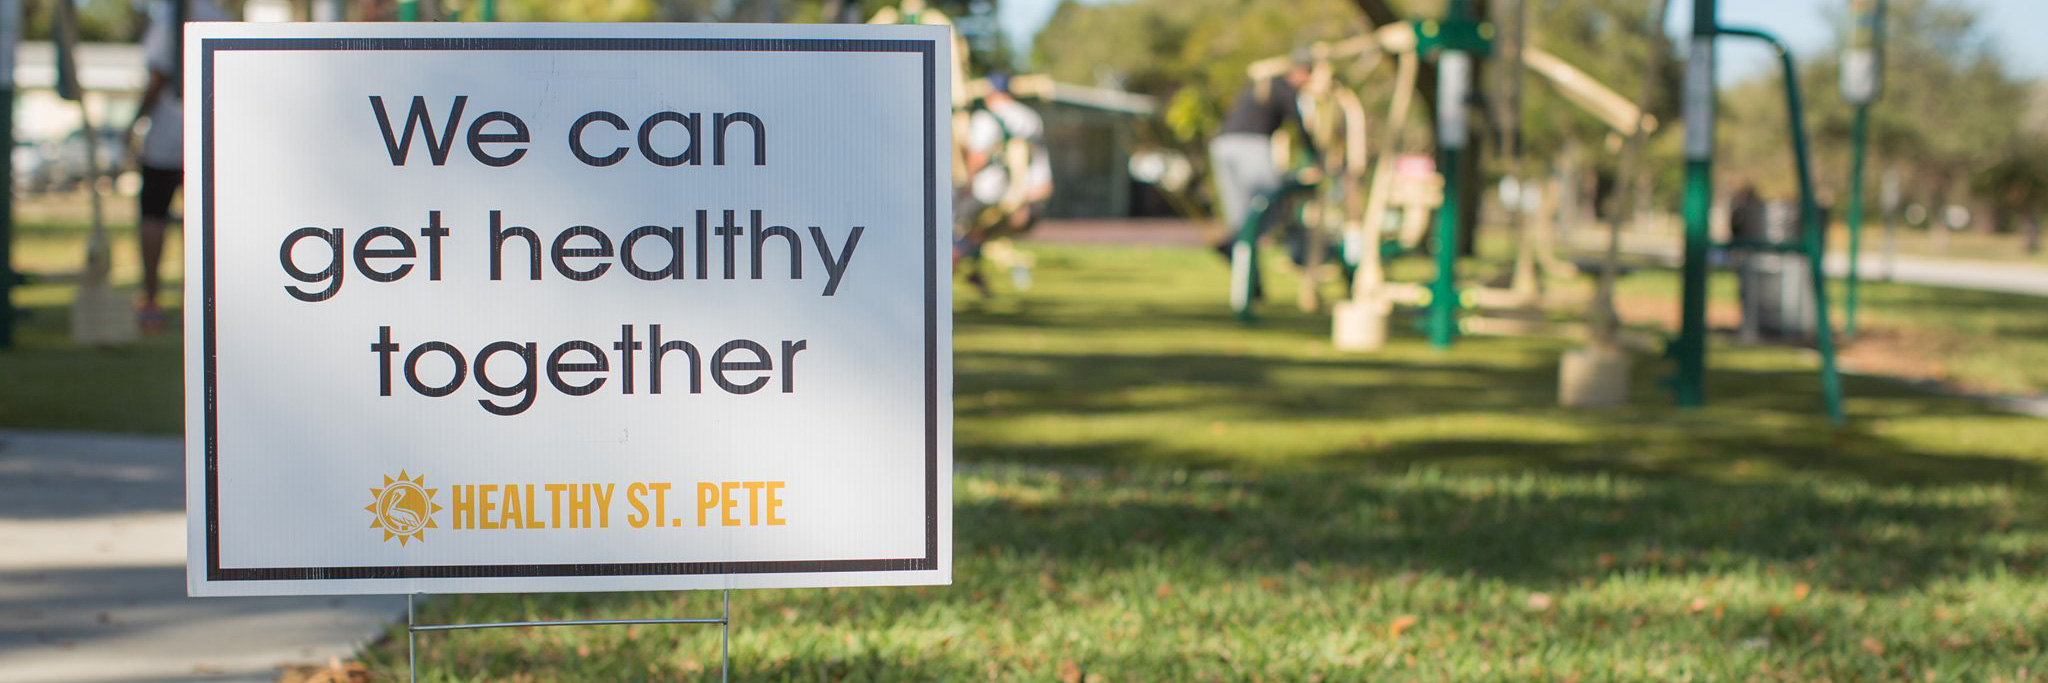 healthy together yard sign